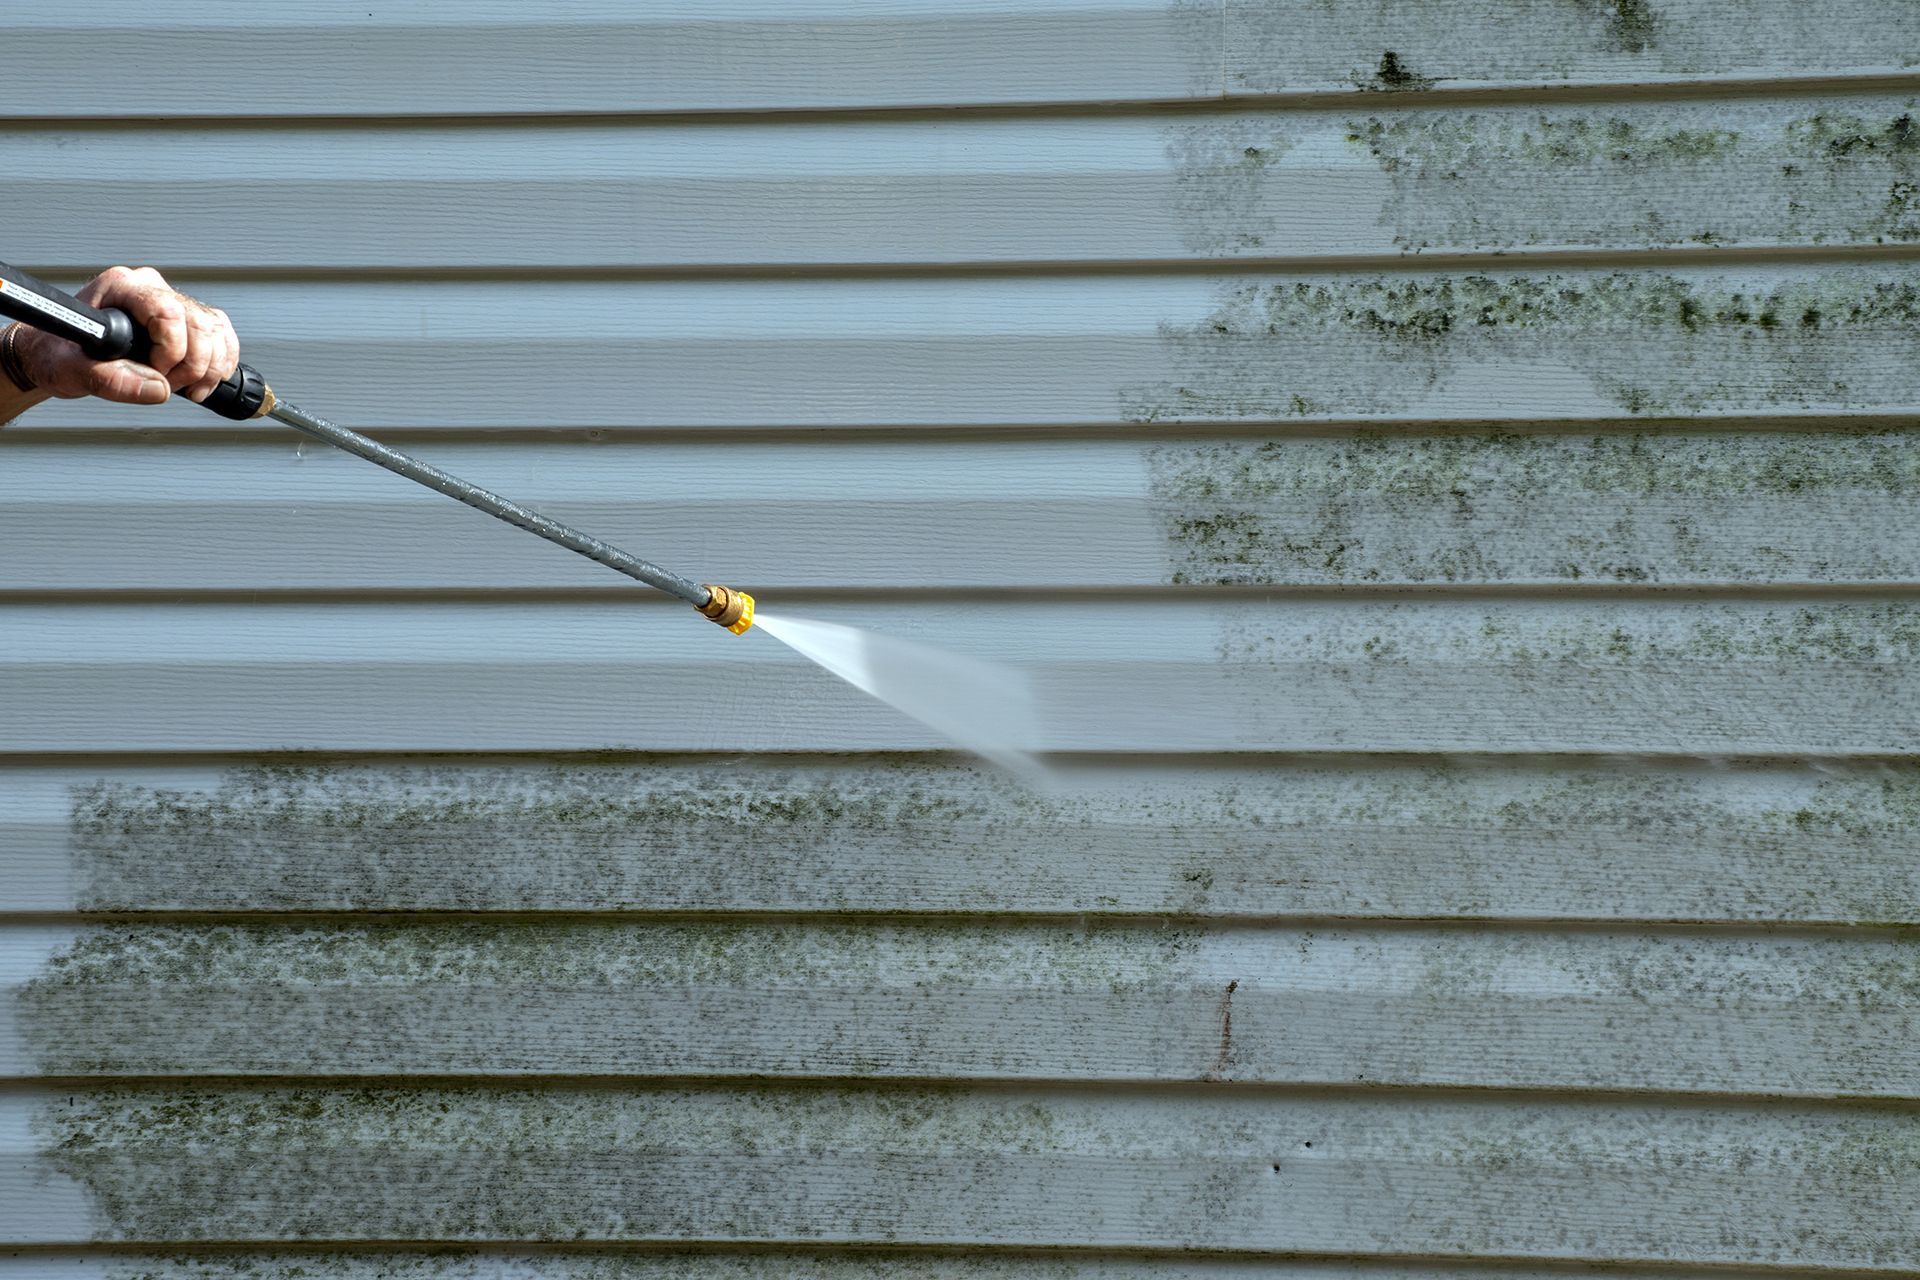 A person is cleaning a siding with a high pressure washer.